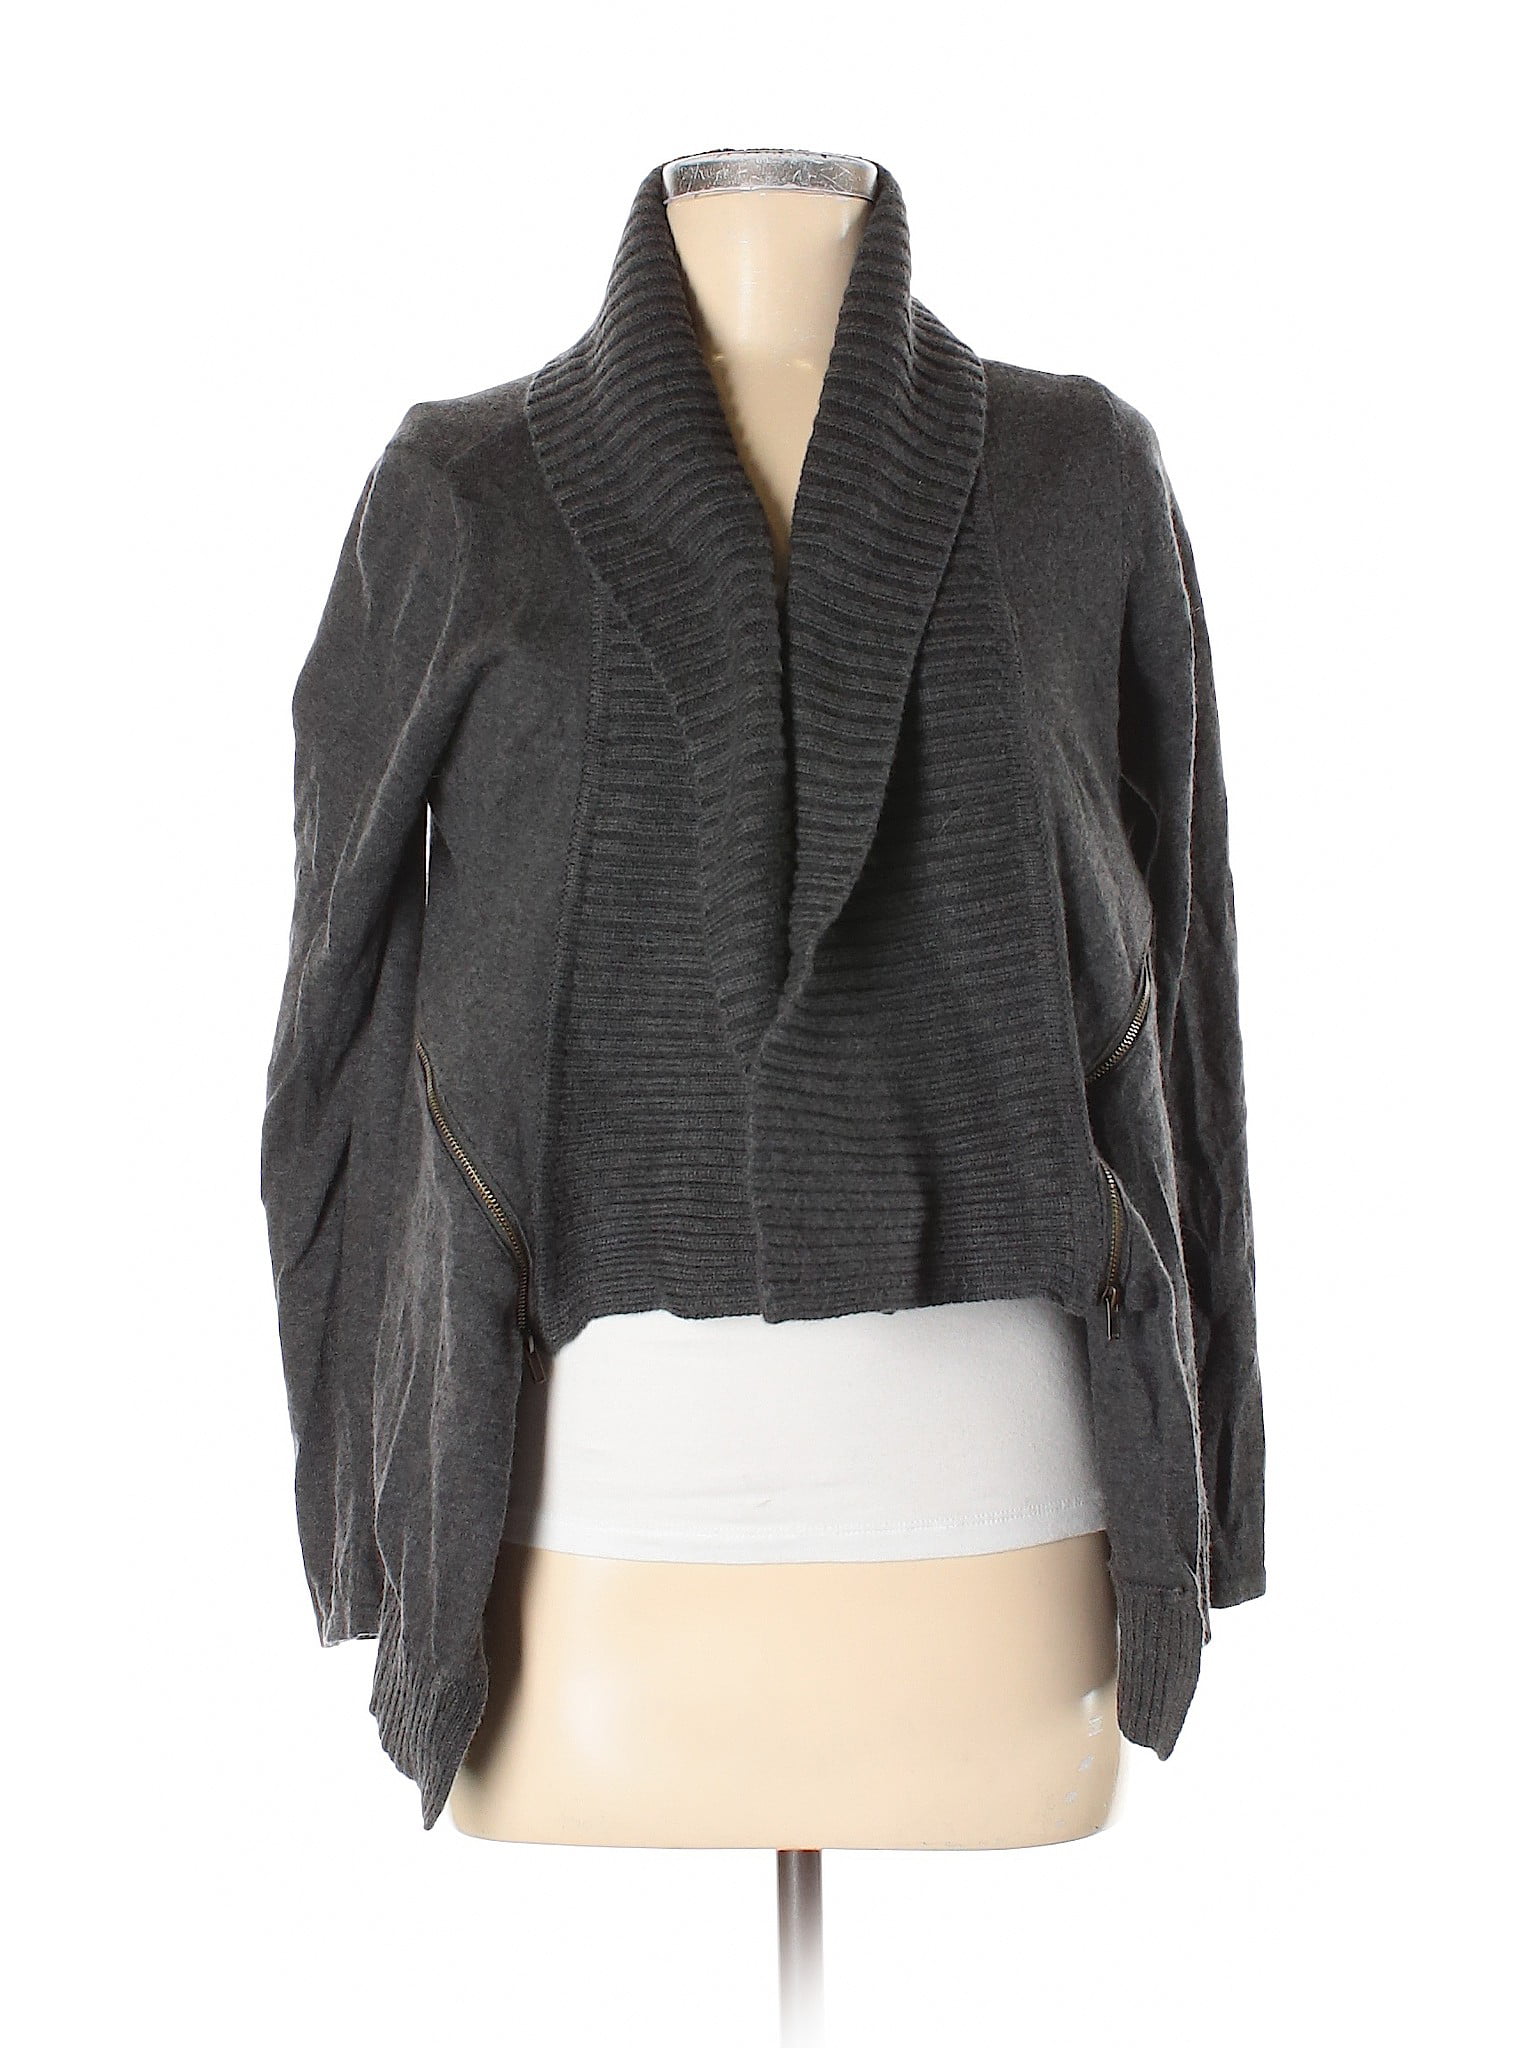 Market & Spruce - Pre-Owned Market and Spruce Women's Size M Cardigan ...